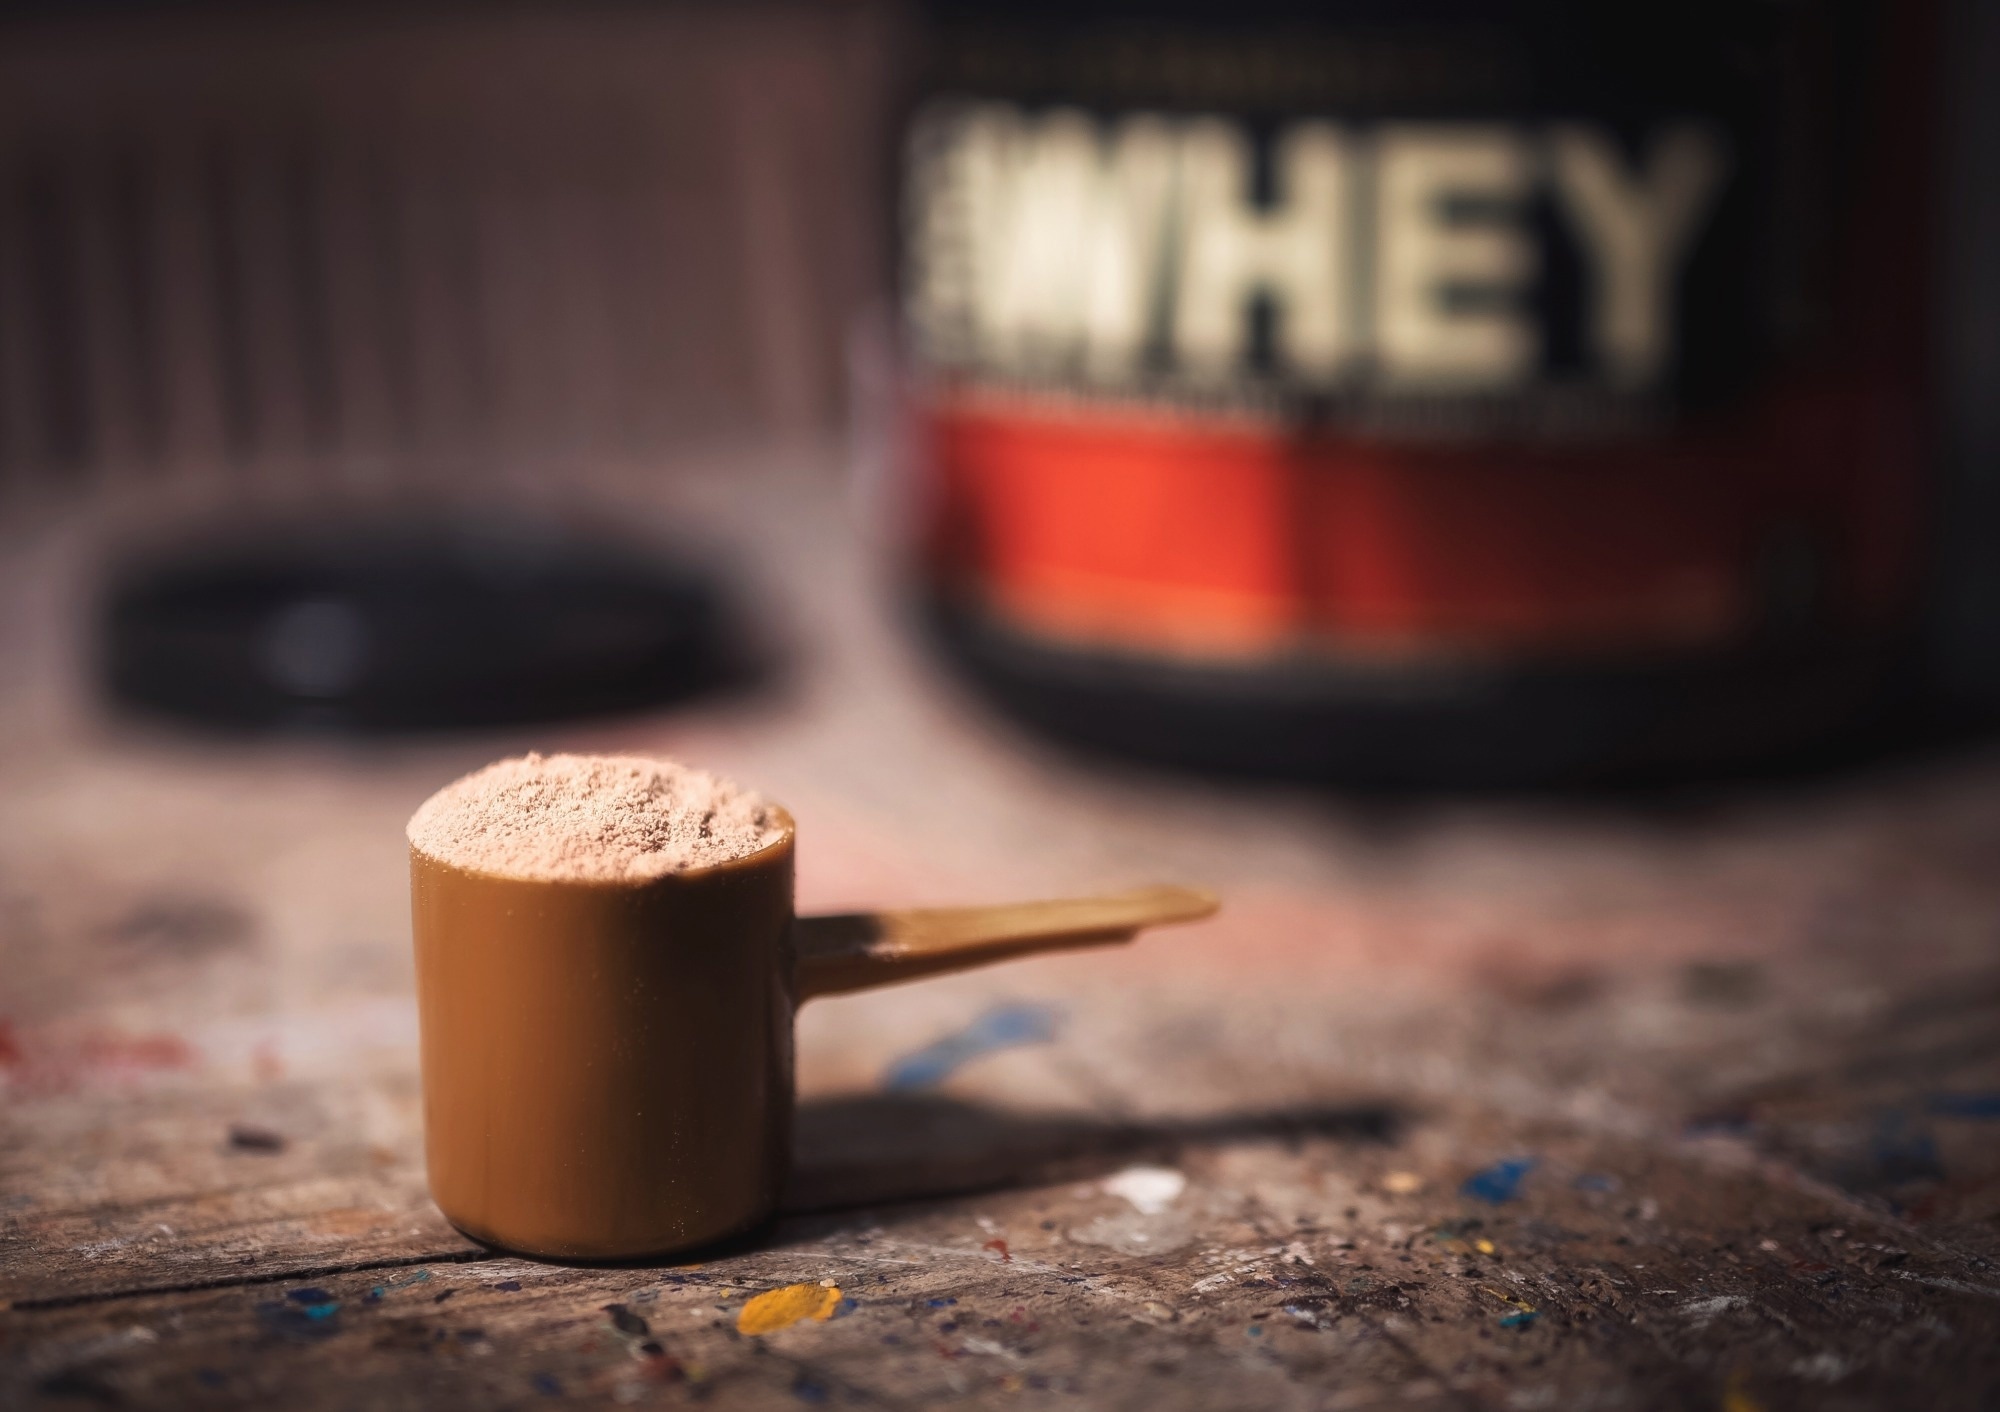 Study: Emerging potential of whey proteins in prevention of cancer. Image Credit: Dan_photography/Shutterstock.com